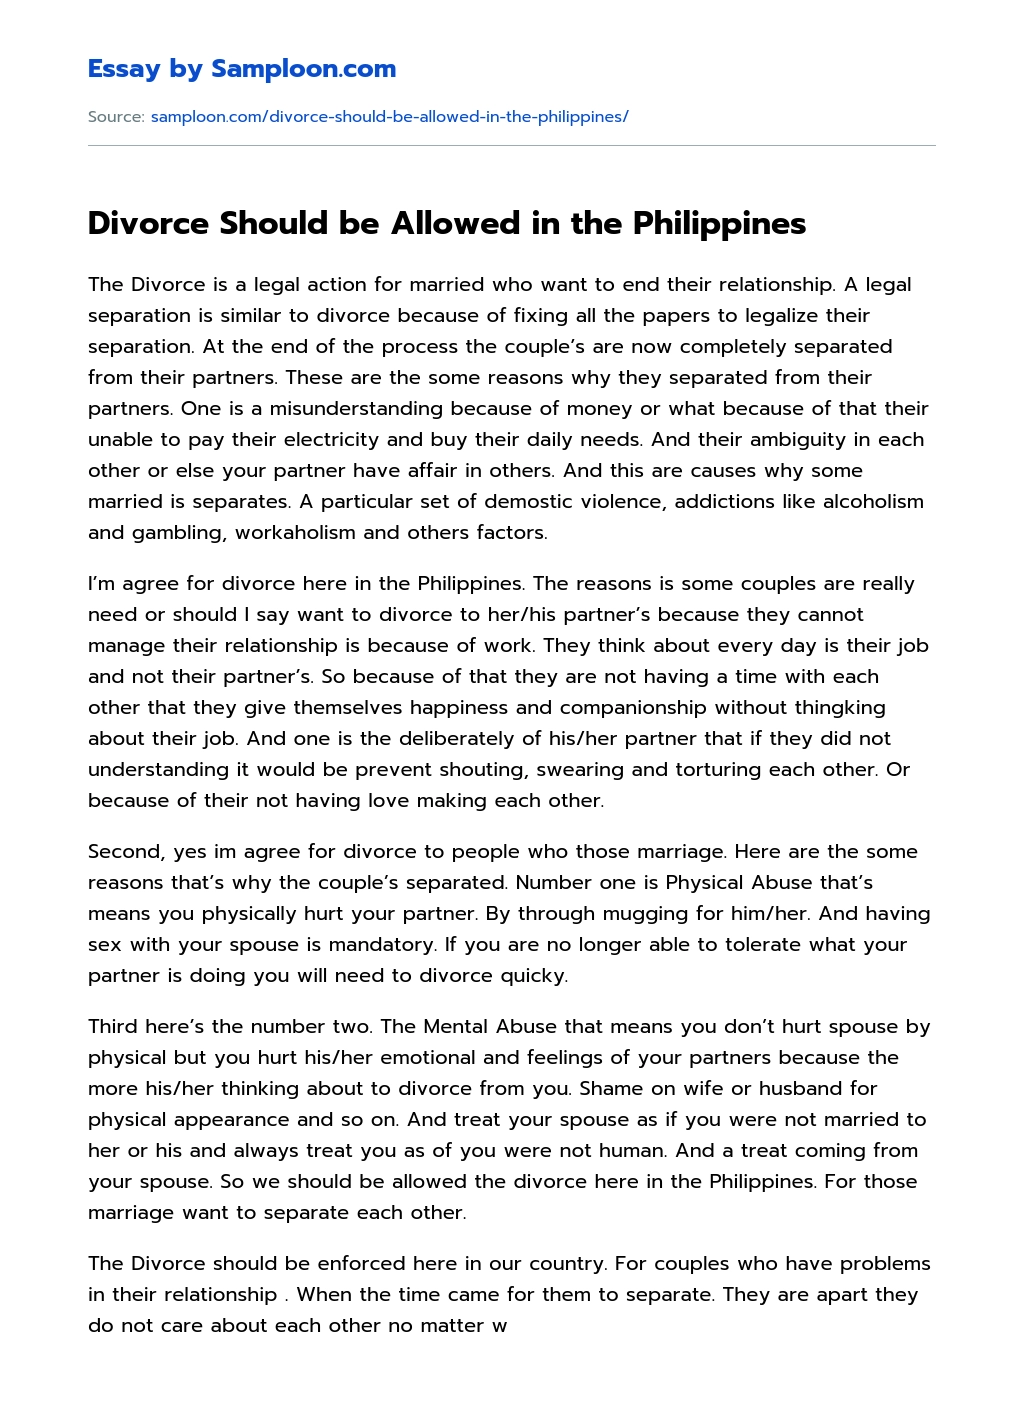 Divorce Should be Allowed in the Philippines Argumentative Essay essay